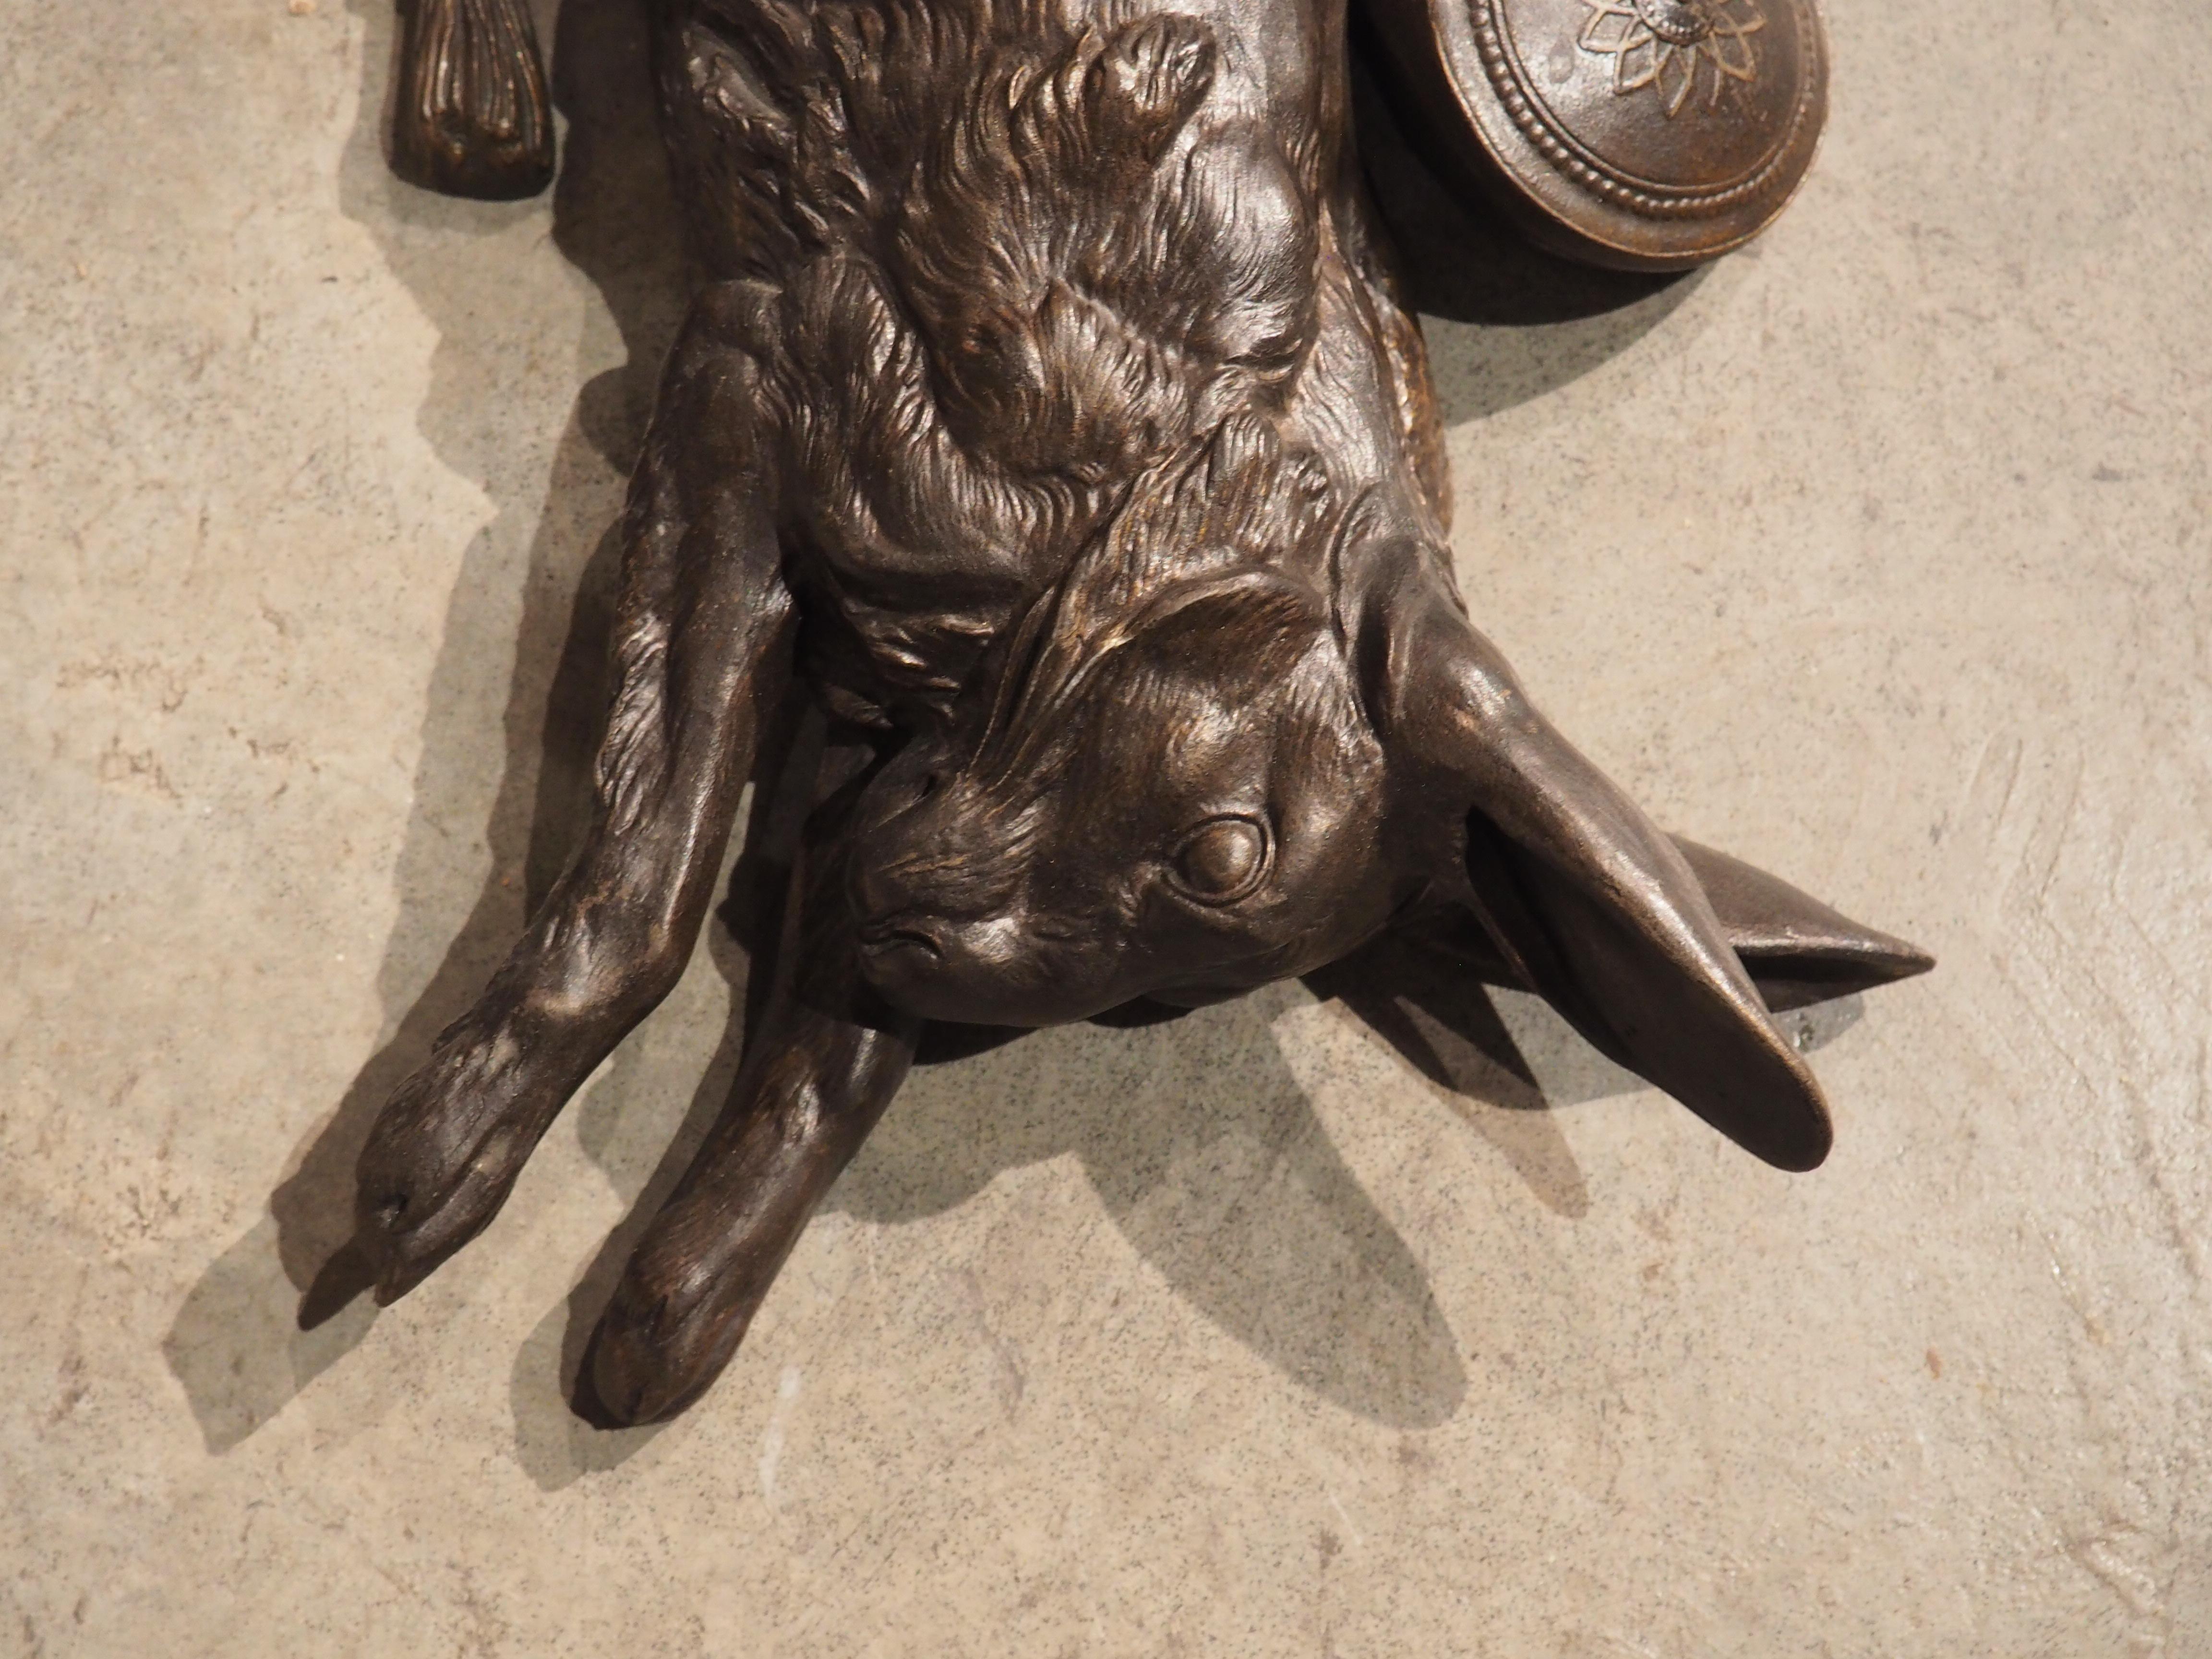 From France, circa 1890, our bronze wall hanging depicts a hunt trophy of a rabbit hanging upside down by one hind leg. This is a technique used for displaying felled game known as the Achilles tendon method. Behind the torso of the rabbit is a